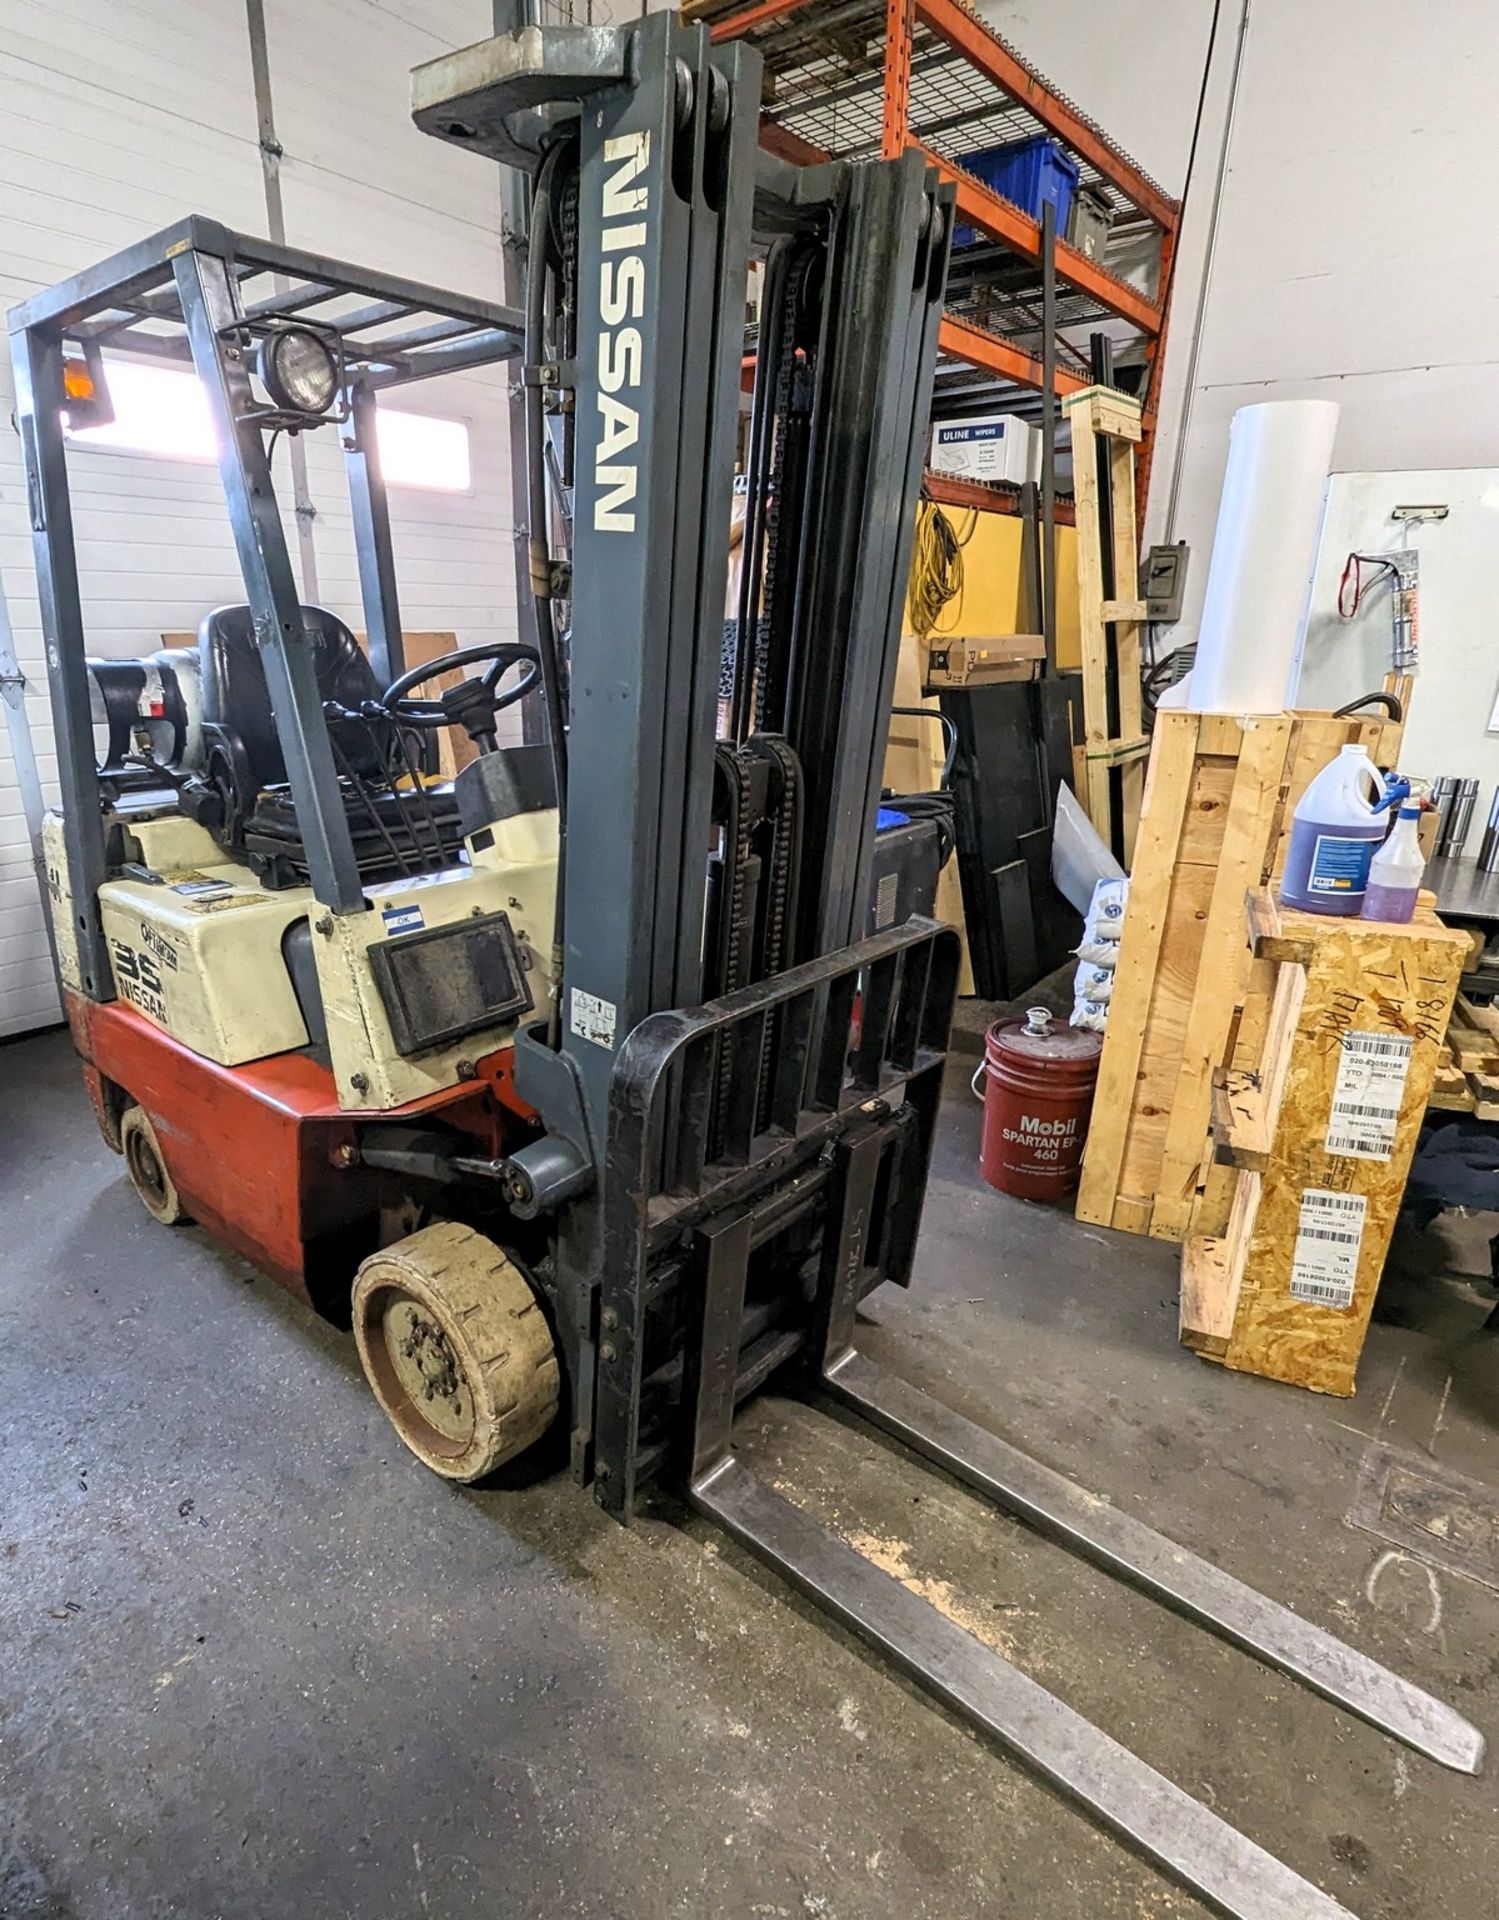 NISSAN CPJ01A18PV PROPANE FORKLIFT, 2,950LB CAP., 187” MAX LIFT, 3-STAGE MAST, SIDE SHIFT, APPROX. - Image 2 of 6